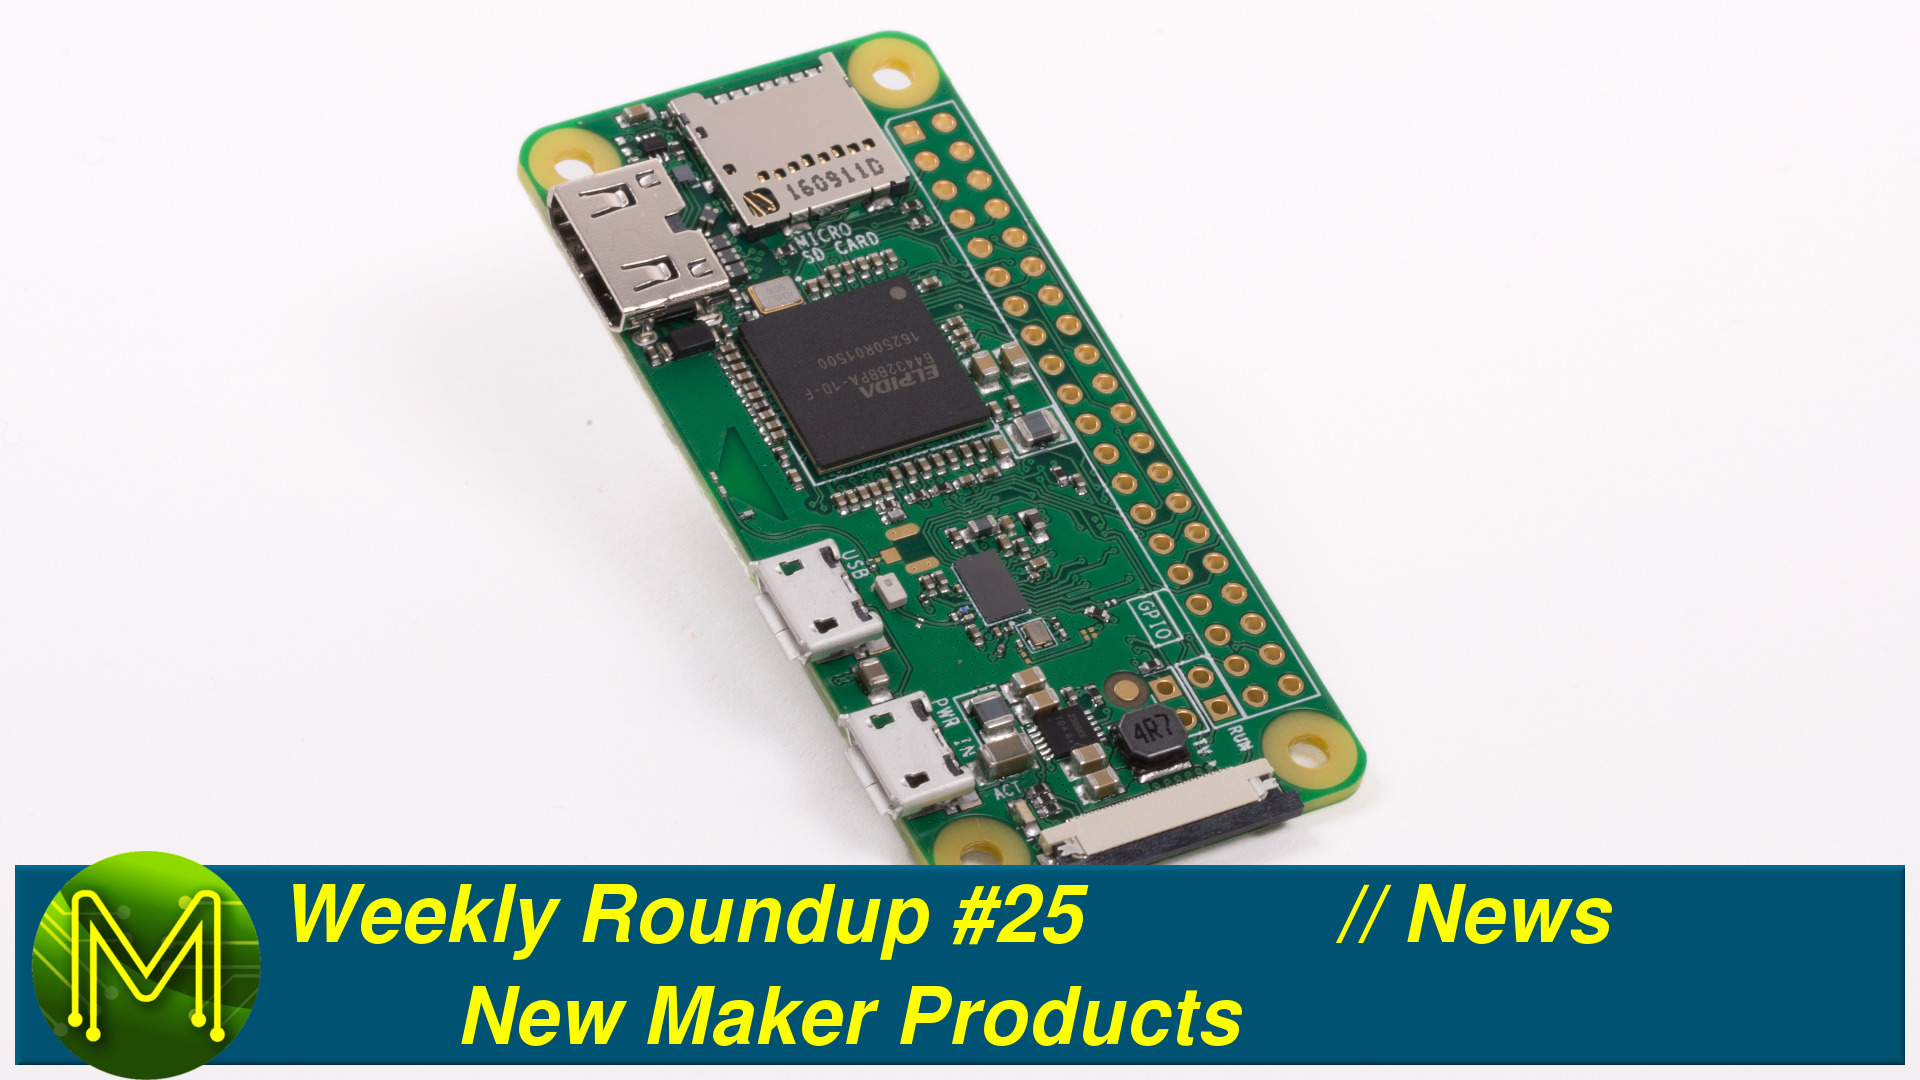 Weekly Roundup #25 - New Maker Products // News